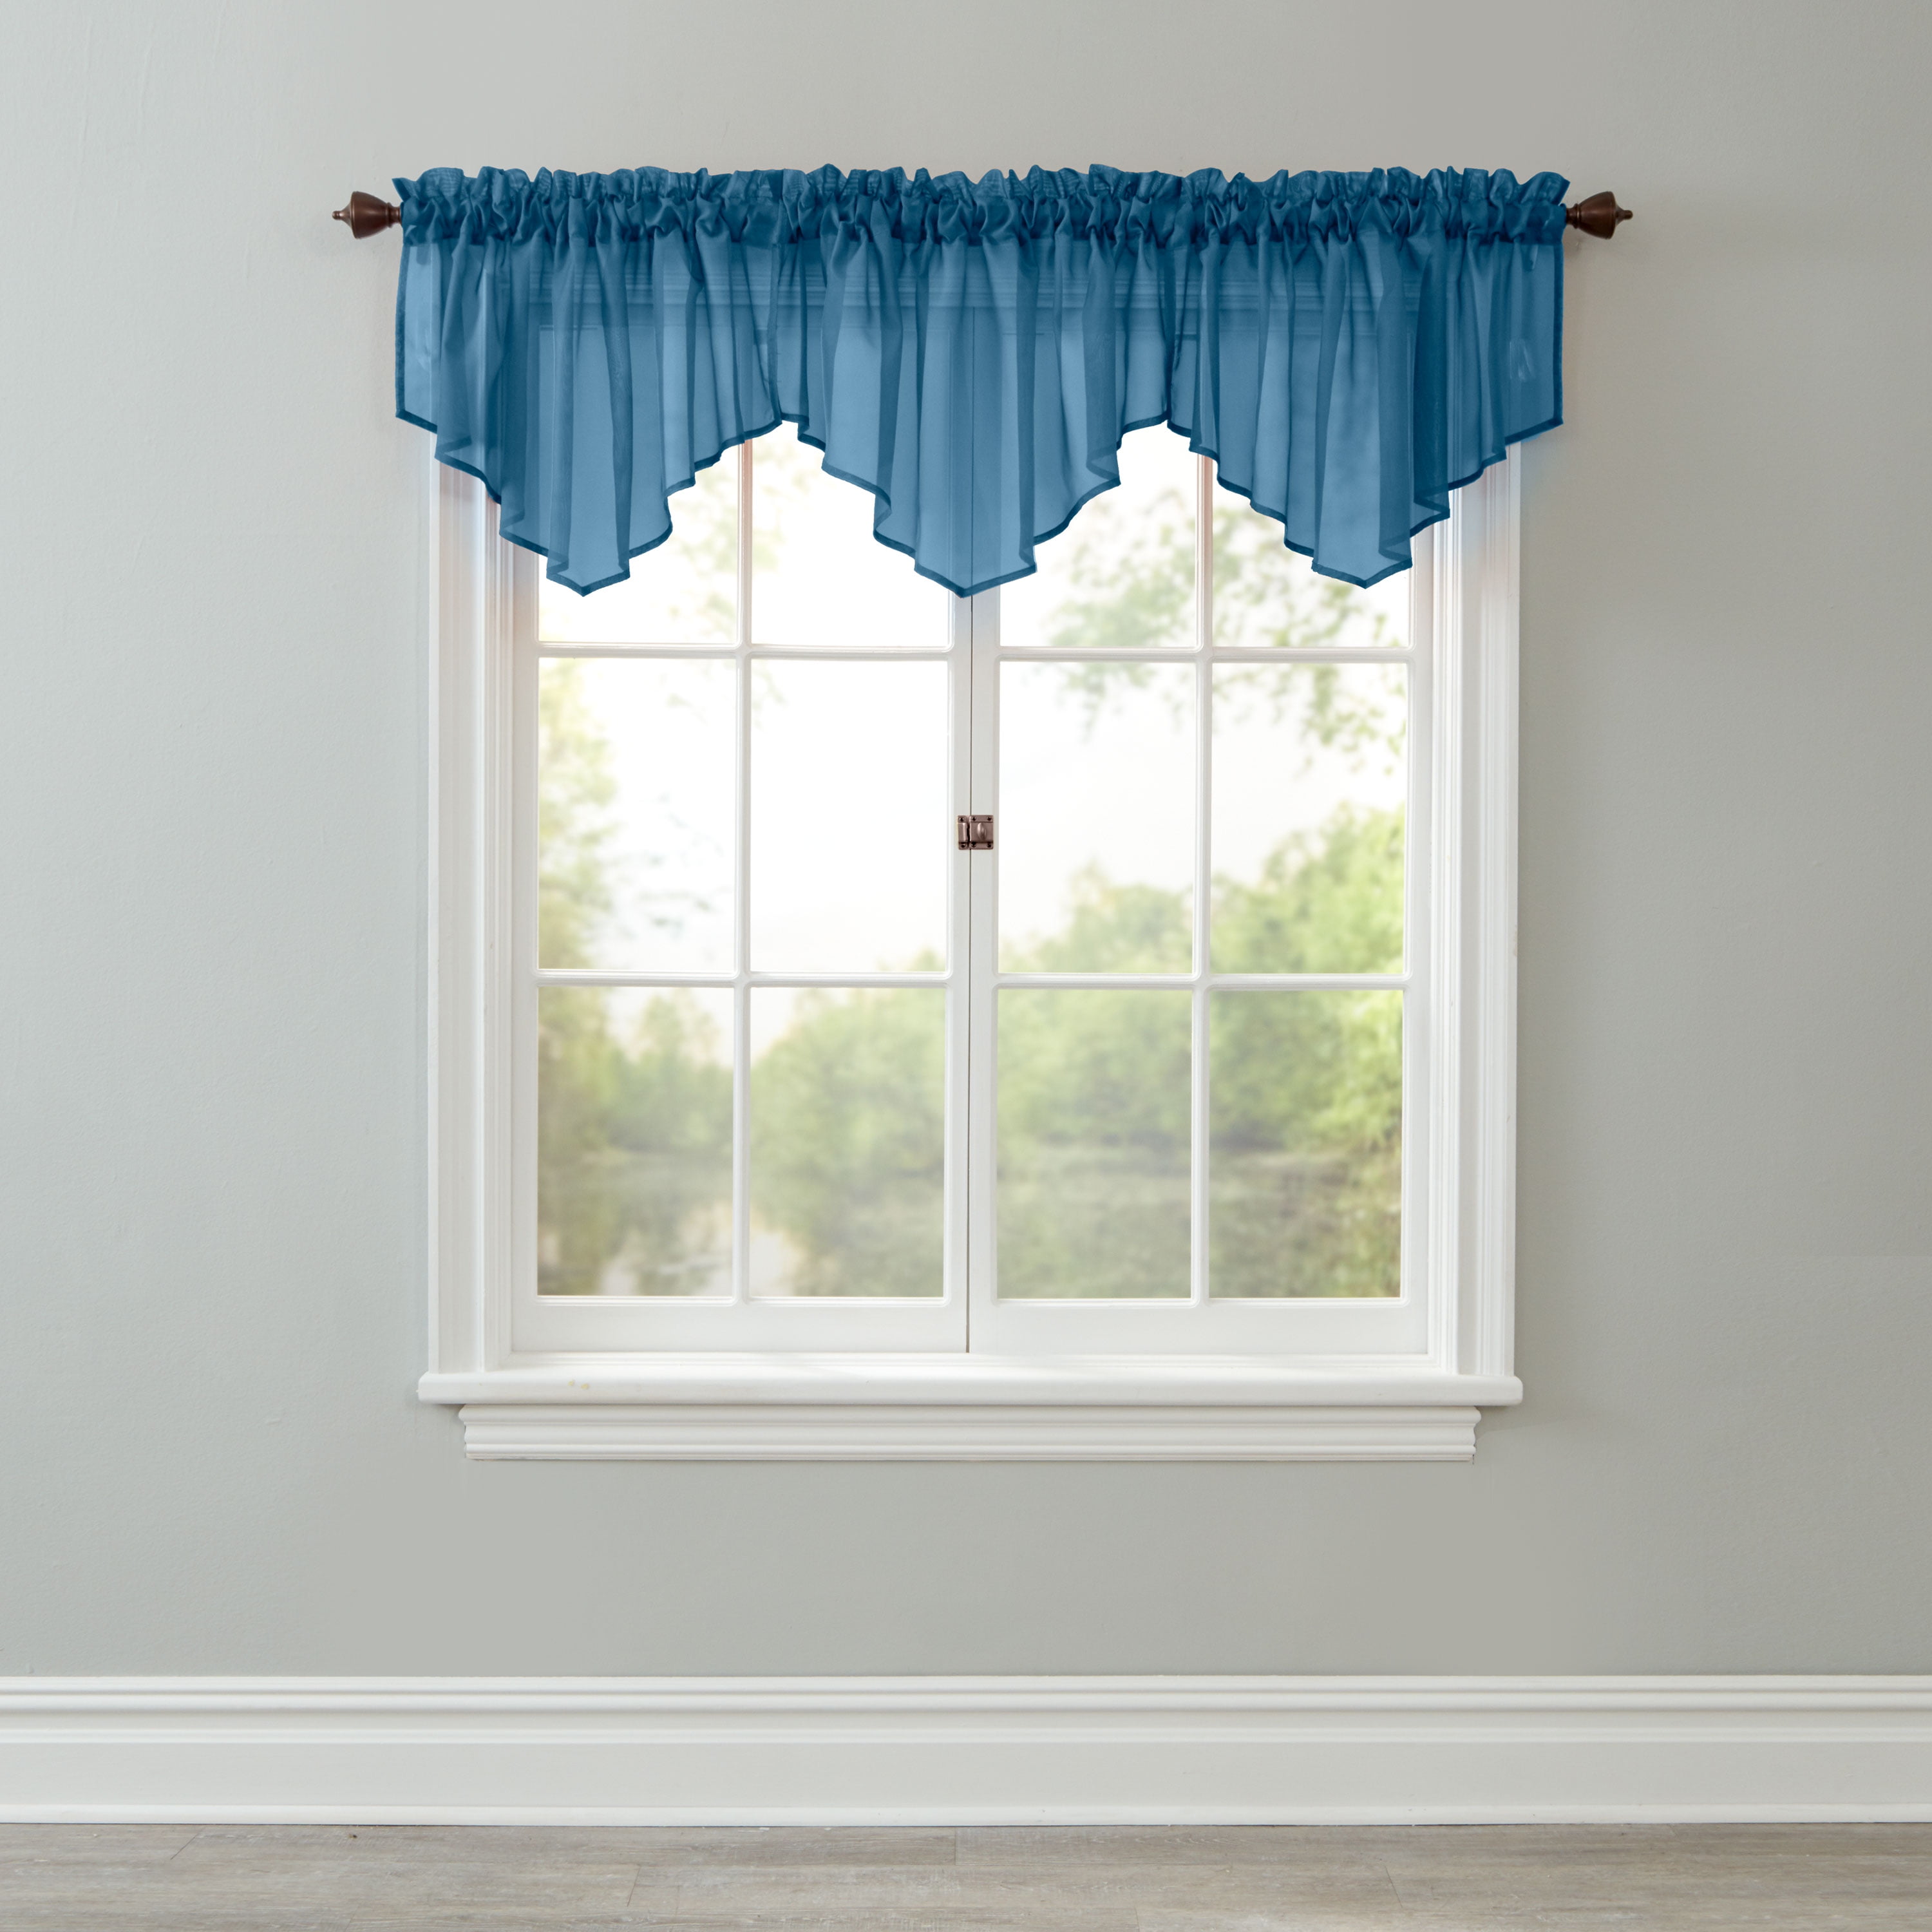 Brylanehome Sheer Voile Ascot Valance, Dark Turquoise Window Curtain ...